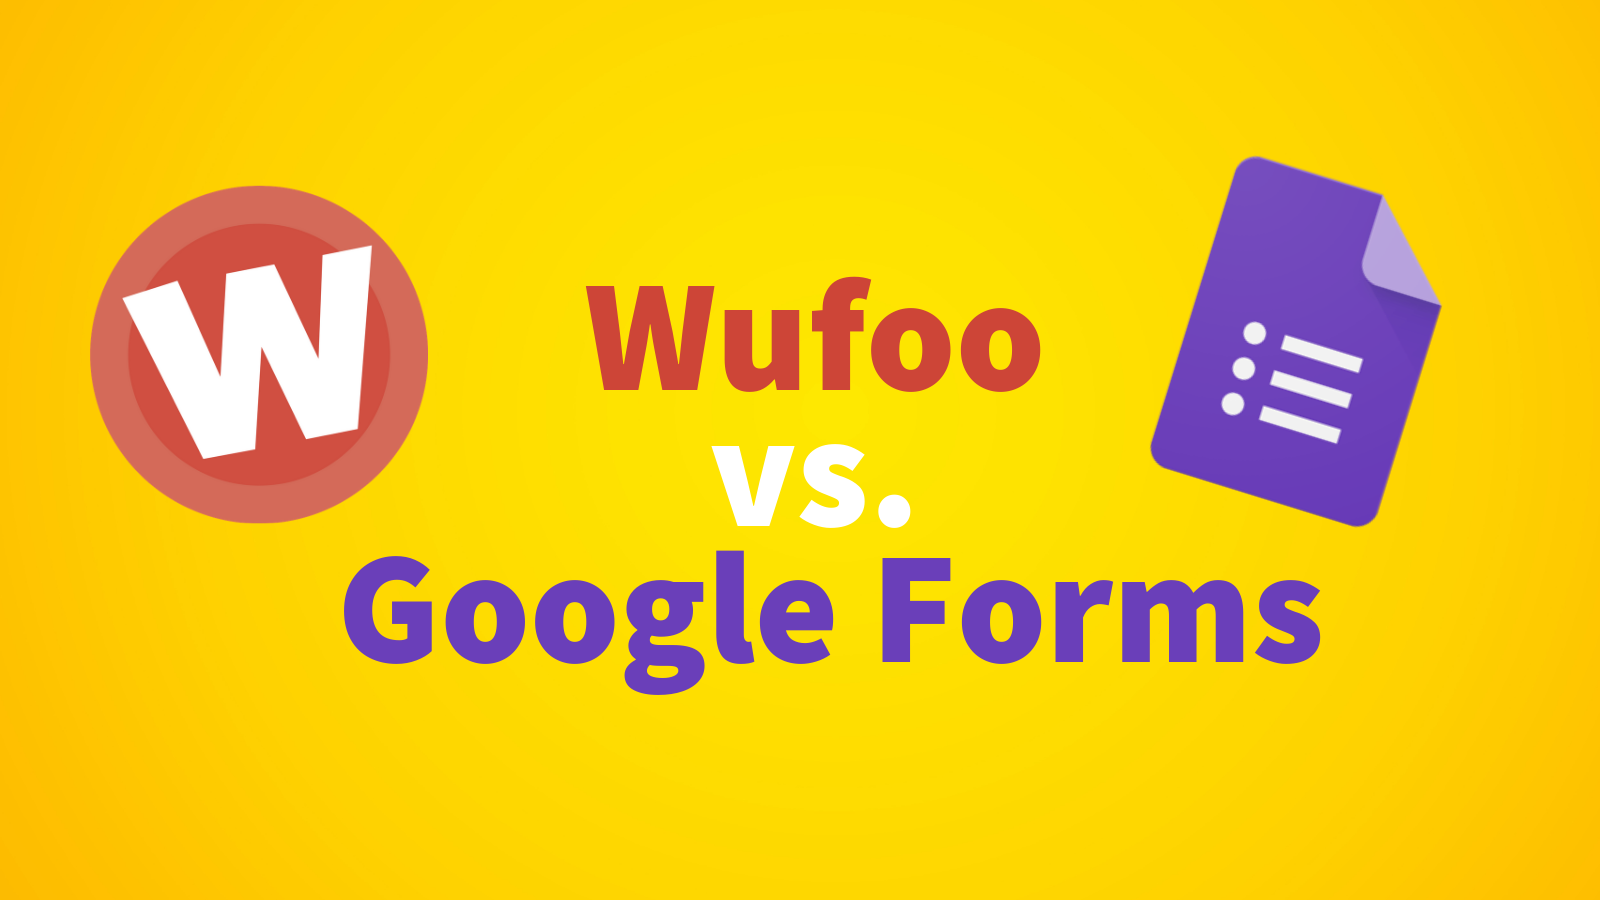 Wufoo vs. Google Forms for Business